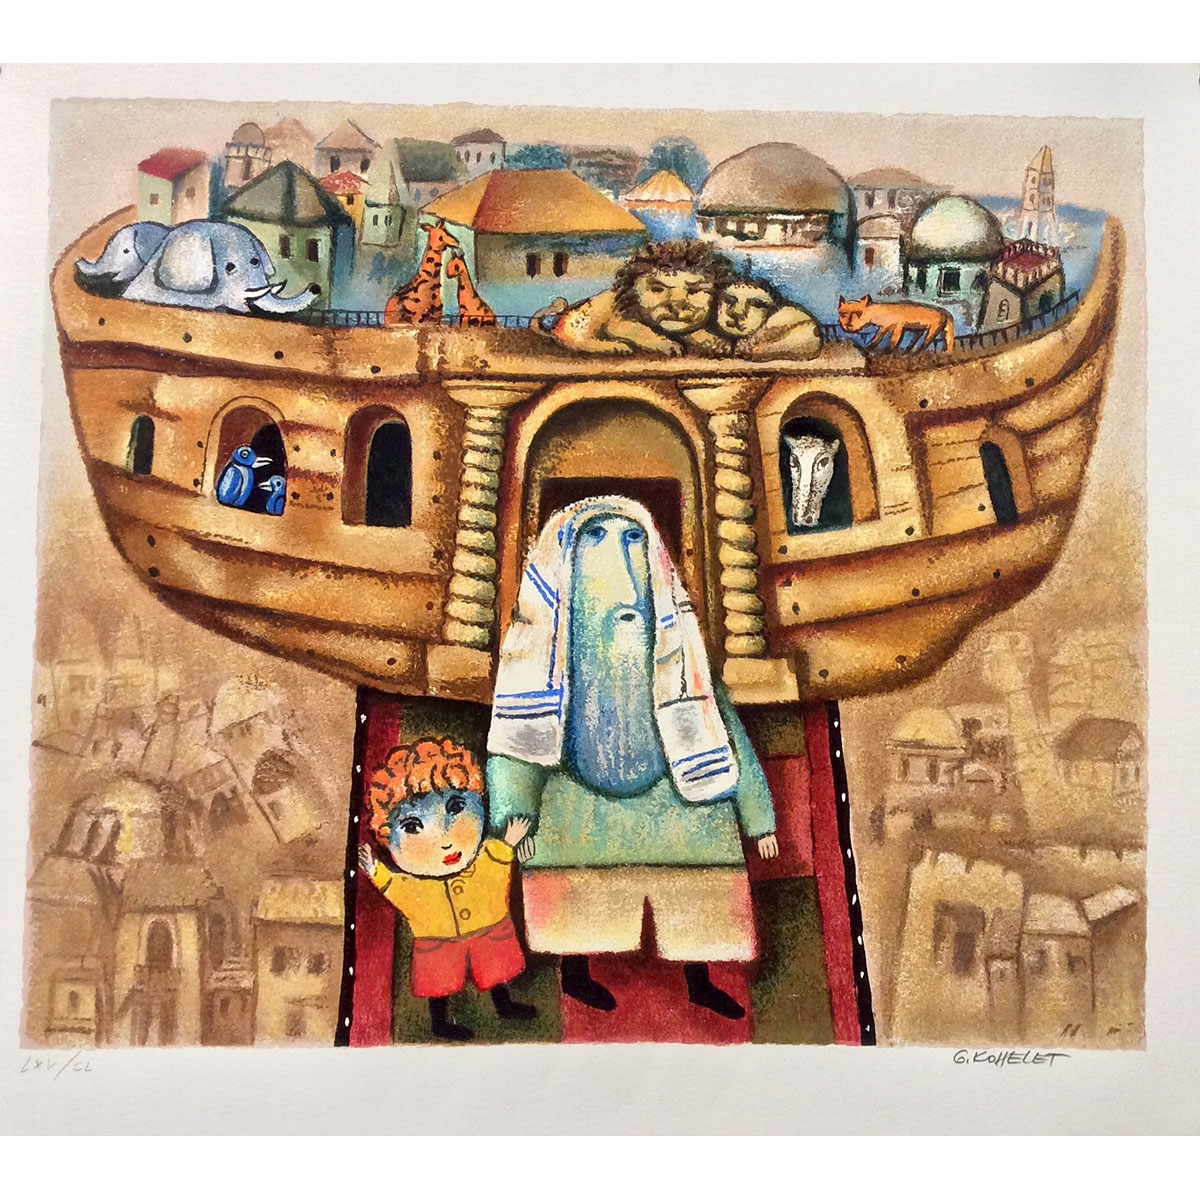 Gregory Kohelet - Noah's Ark Serigraph (Hand Signed and Numbered) - 1